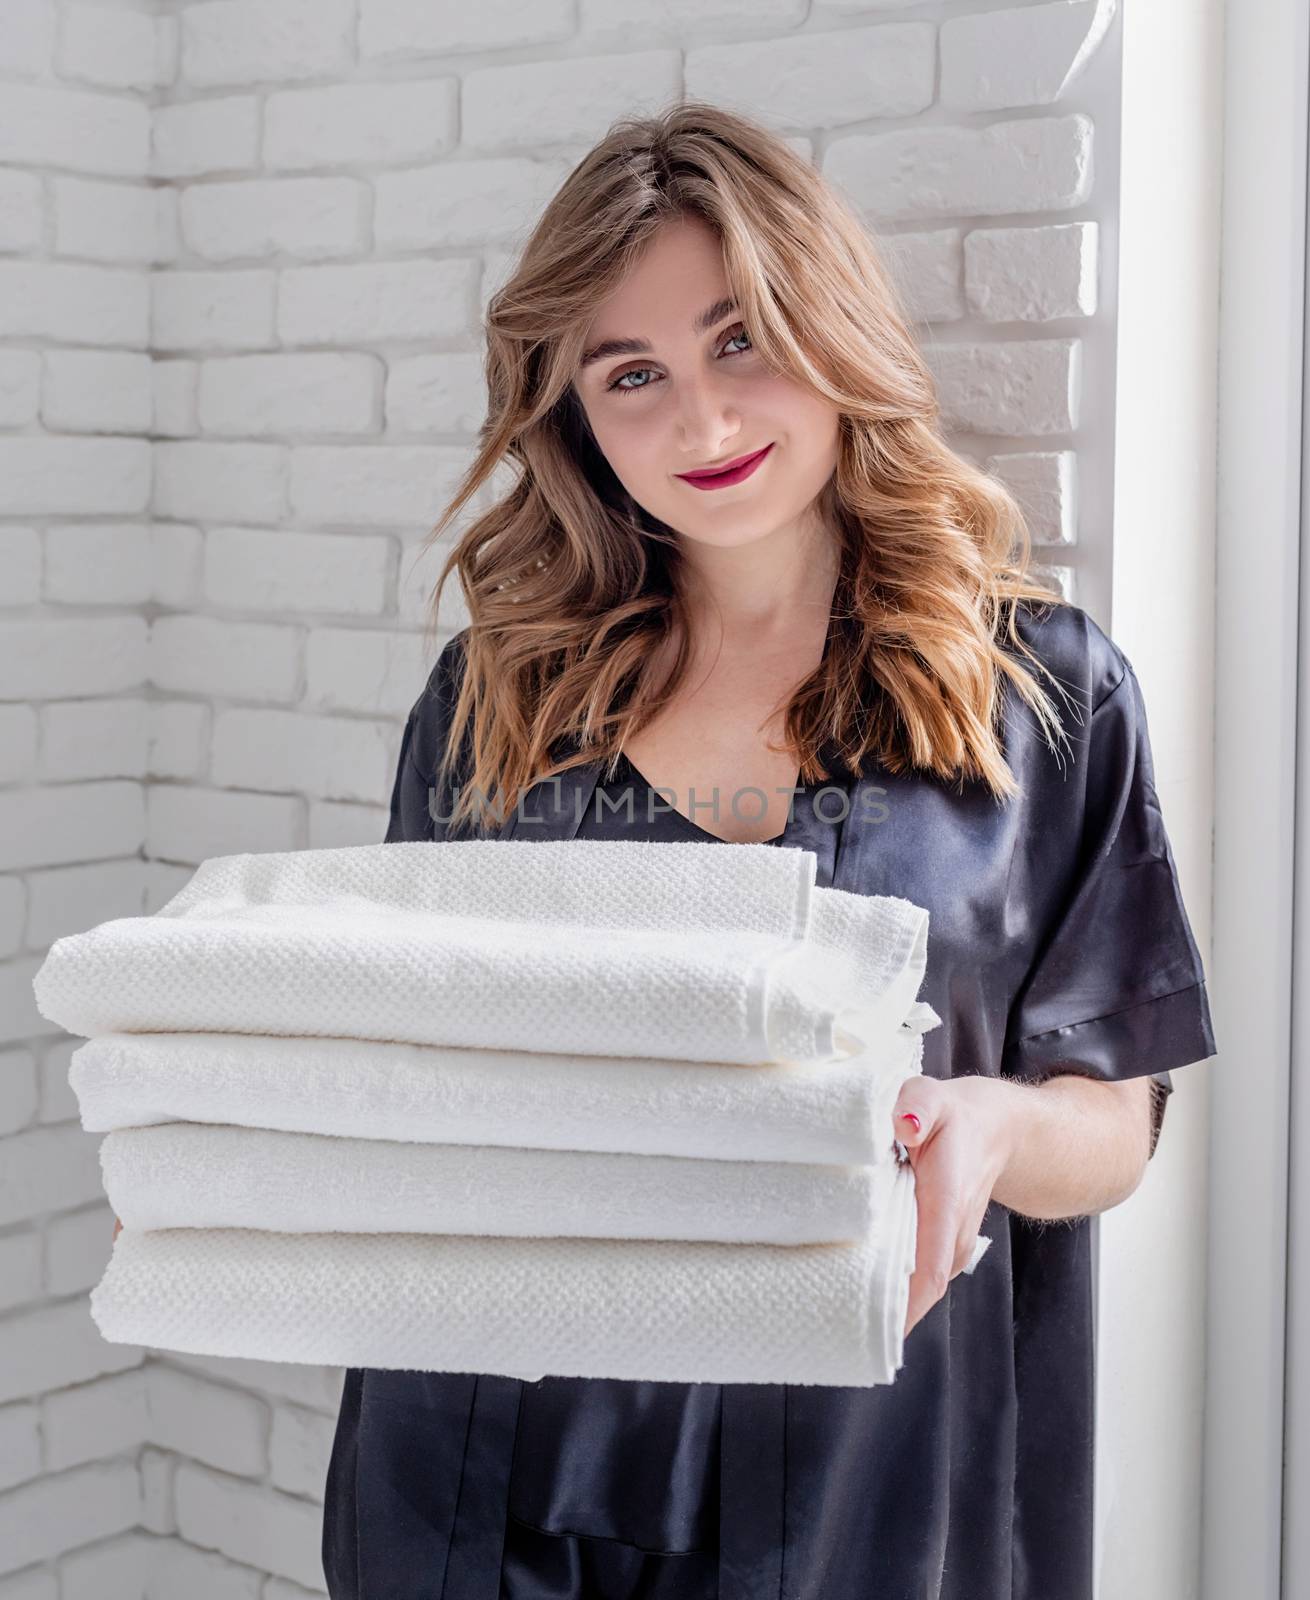 Laundry concept. Young beautiful woman in black pajamas holding a pile of clean white towels